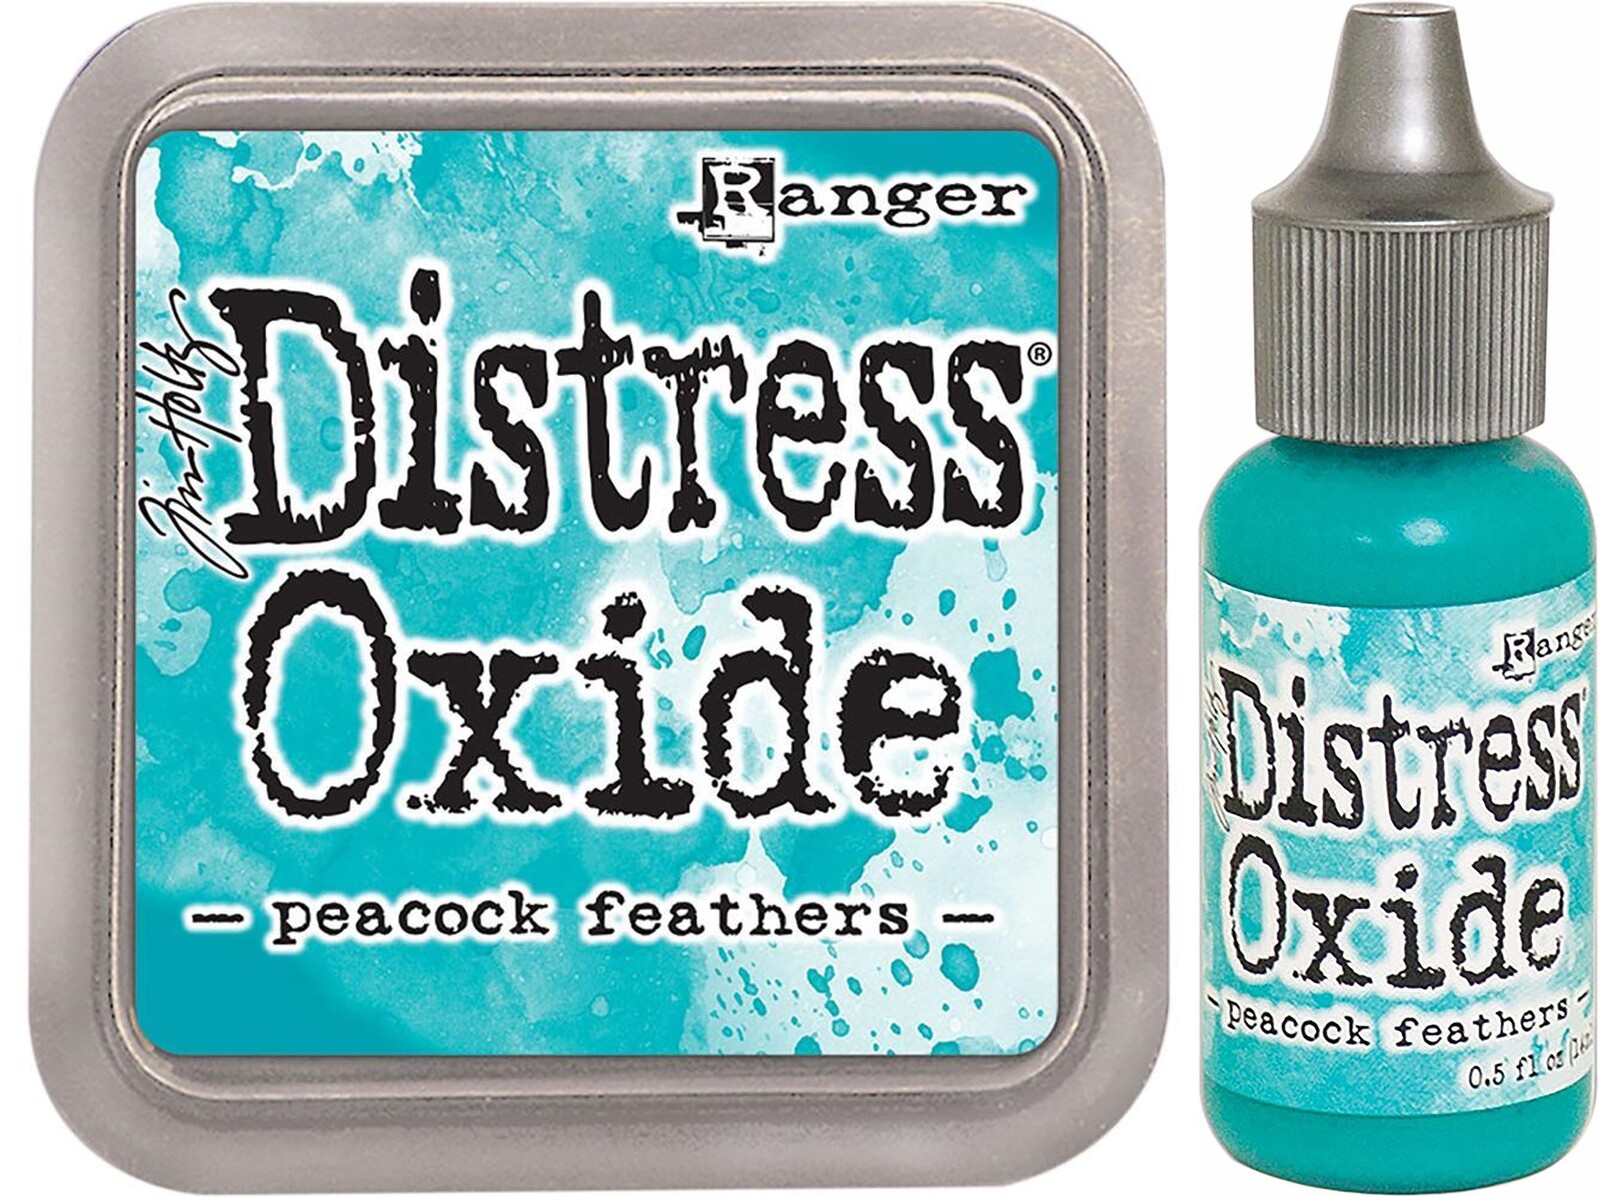 Tim Holtz Distress Oxide Ink Pad + Reinker Peacock Feathers